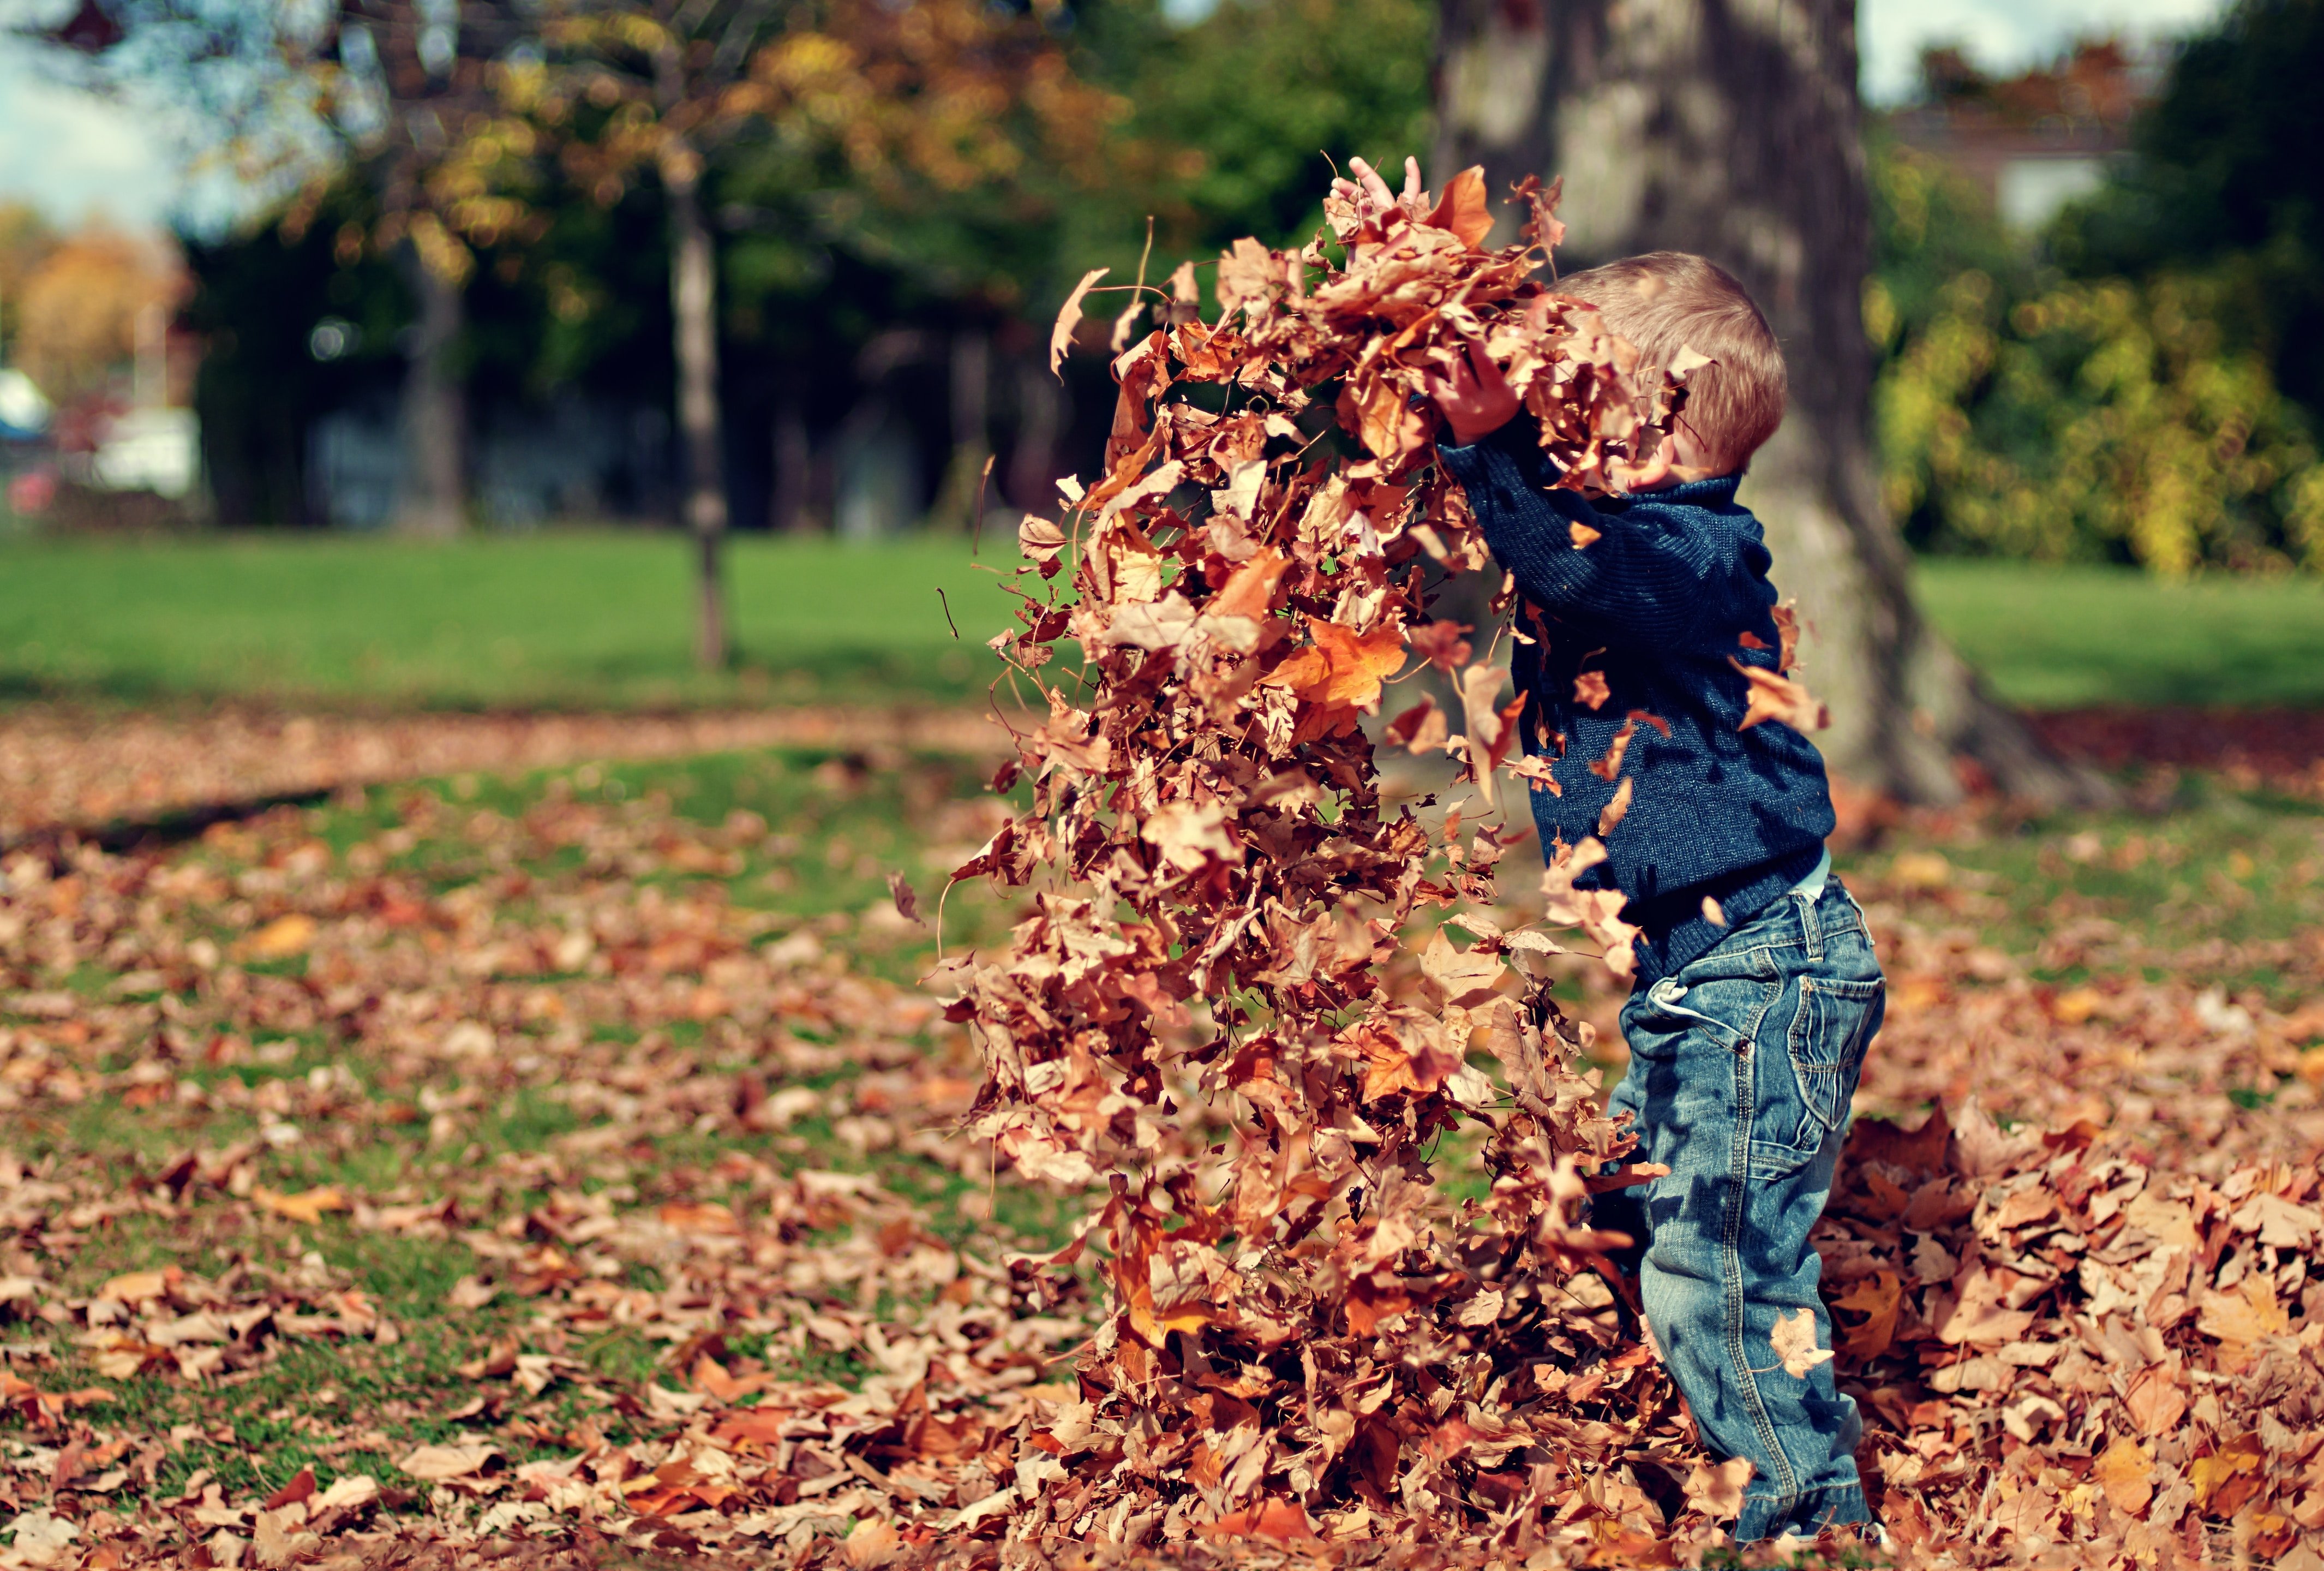 A child playing with the raked leaves | Source: Unsplash.com